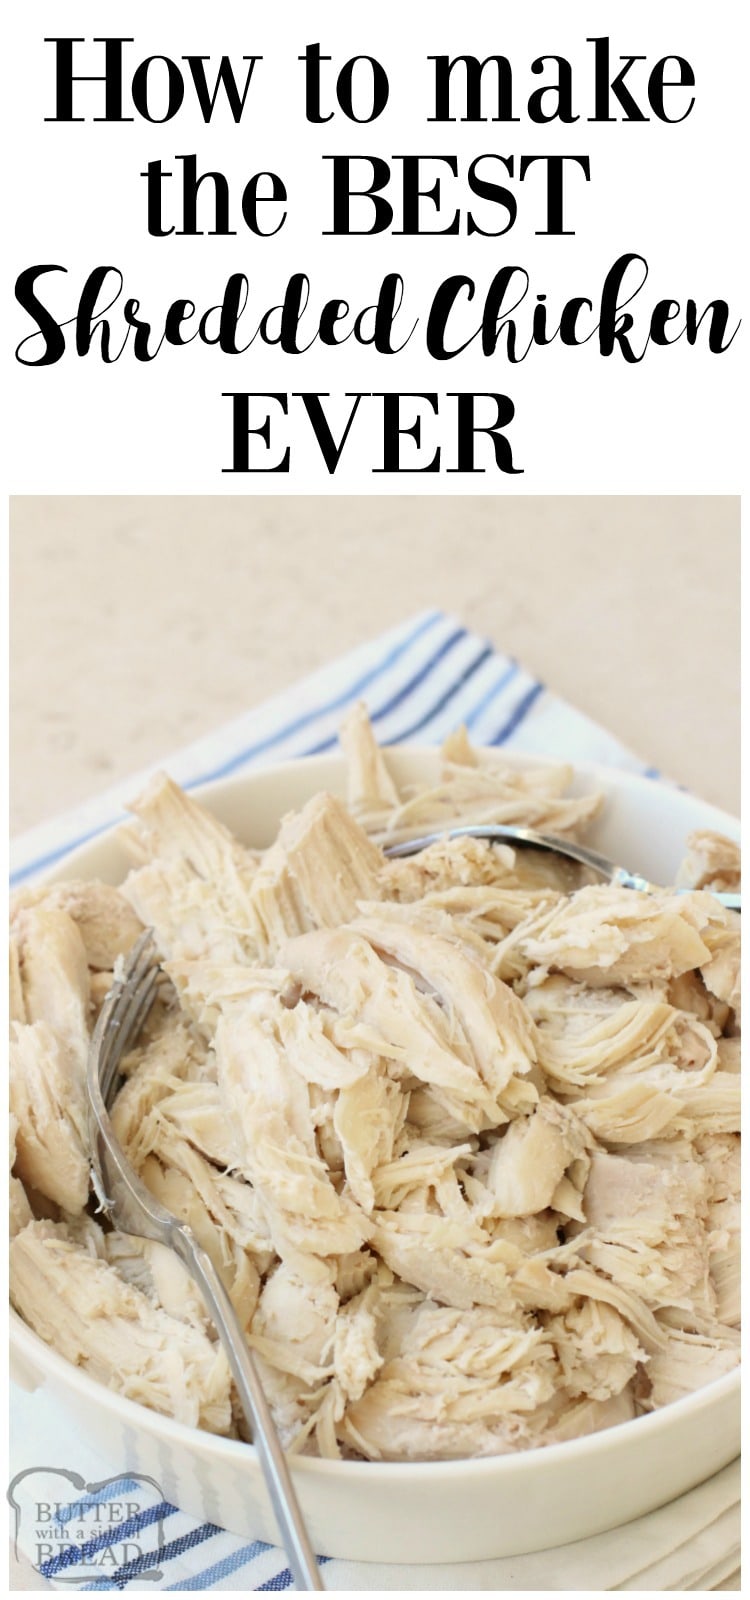 How to make Shredded Chicken to use in recipes, an easy method for how to make the best shredded chicken ever! Try these simple instructions for moist, flavorful crockpot shredded chicken.